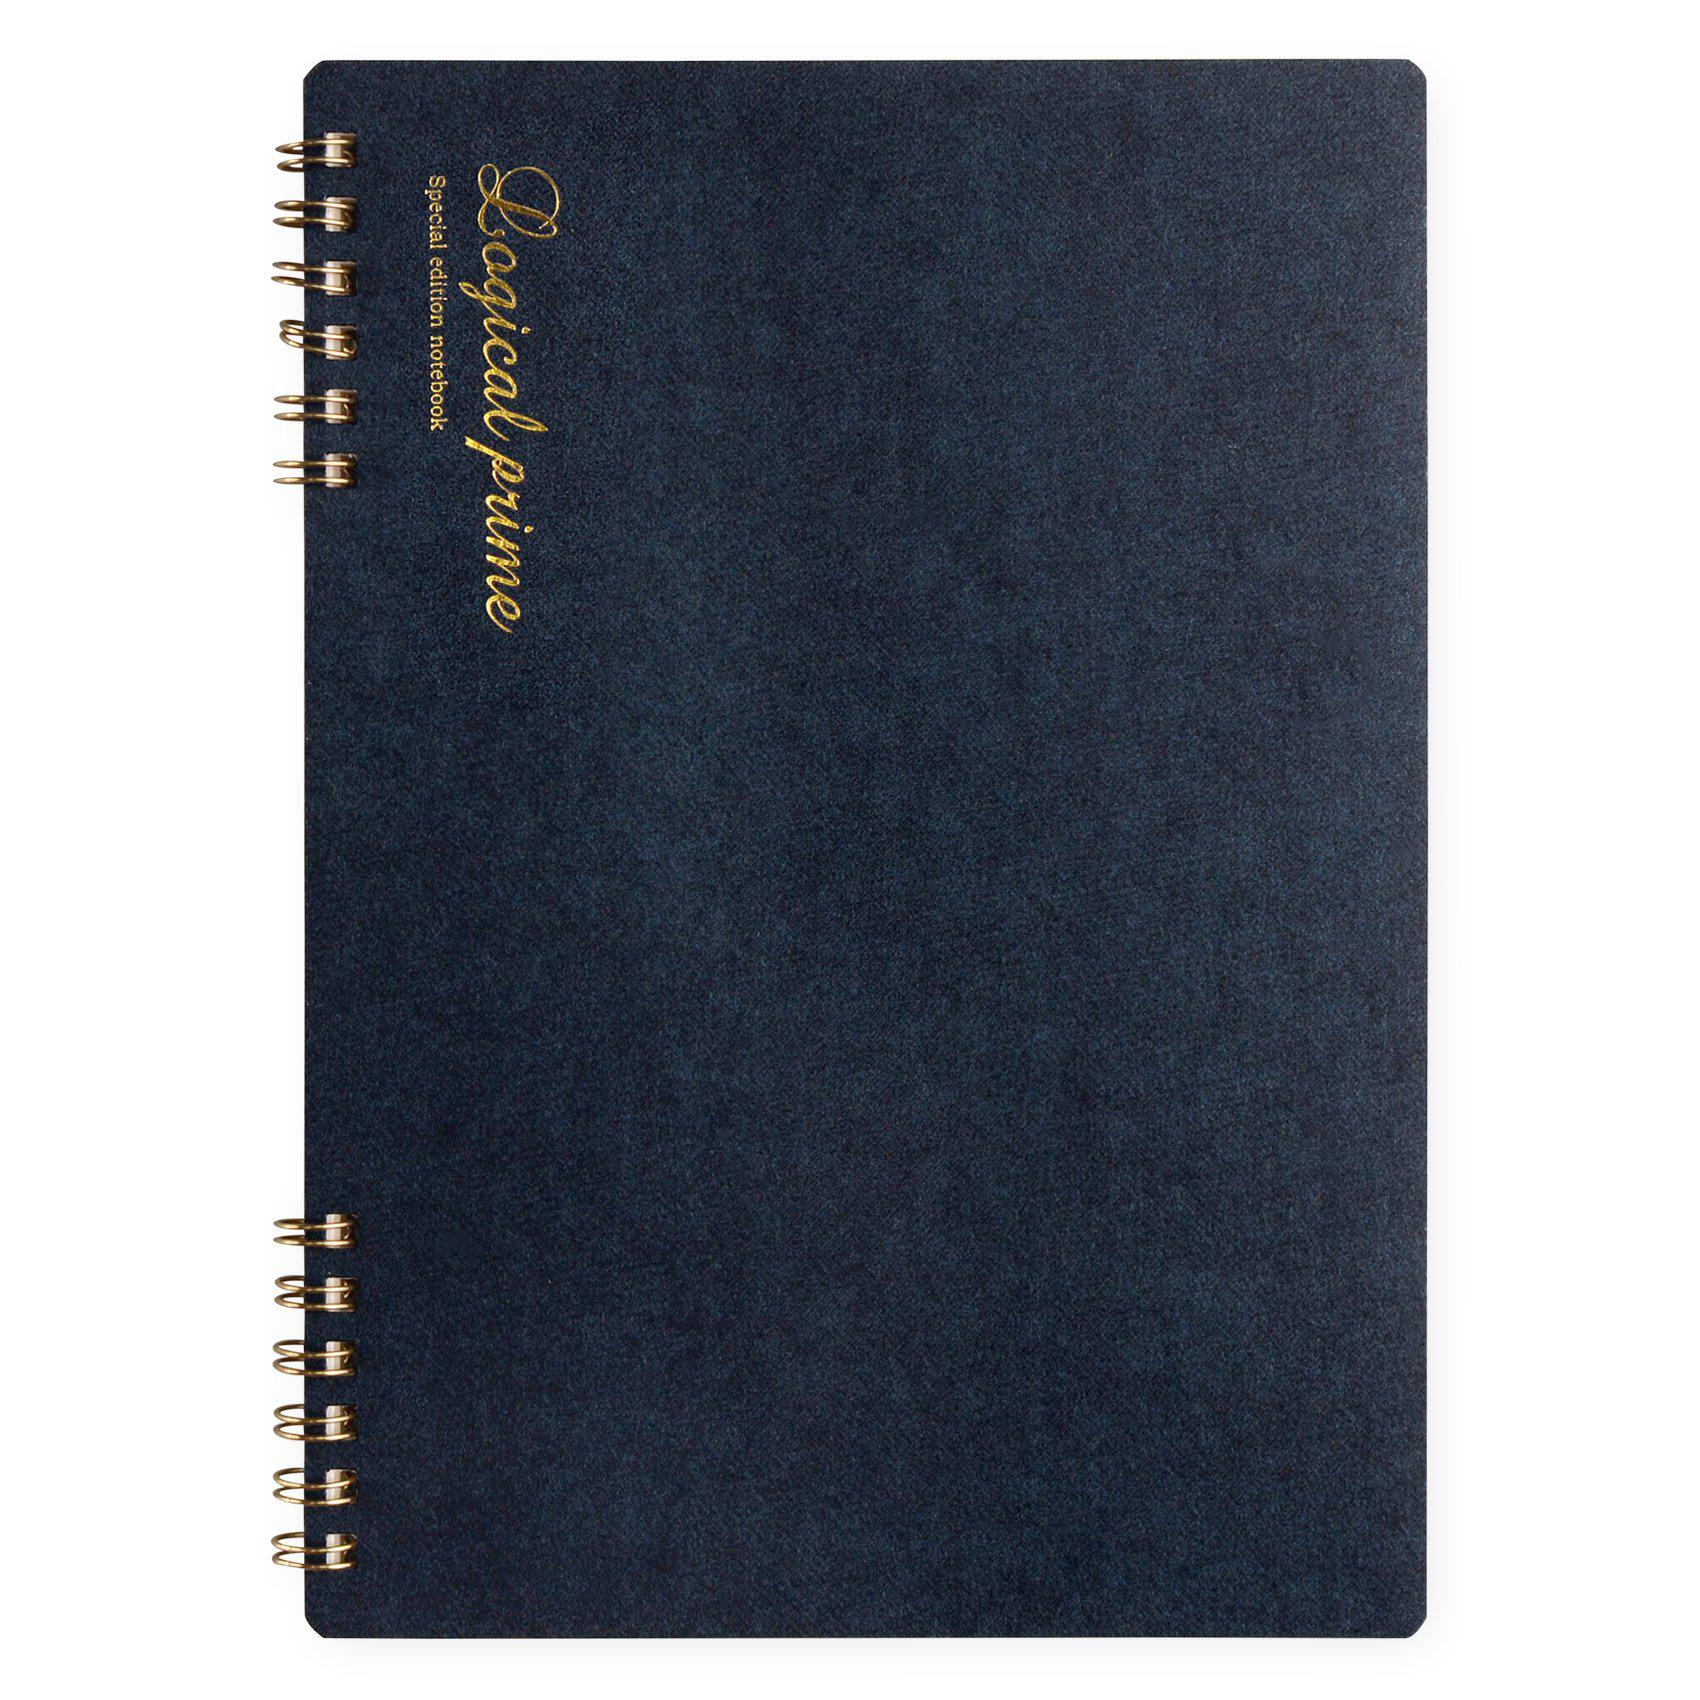 Logical Prime Notebook Ring Binding Blue | A5 or B5